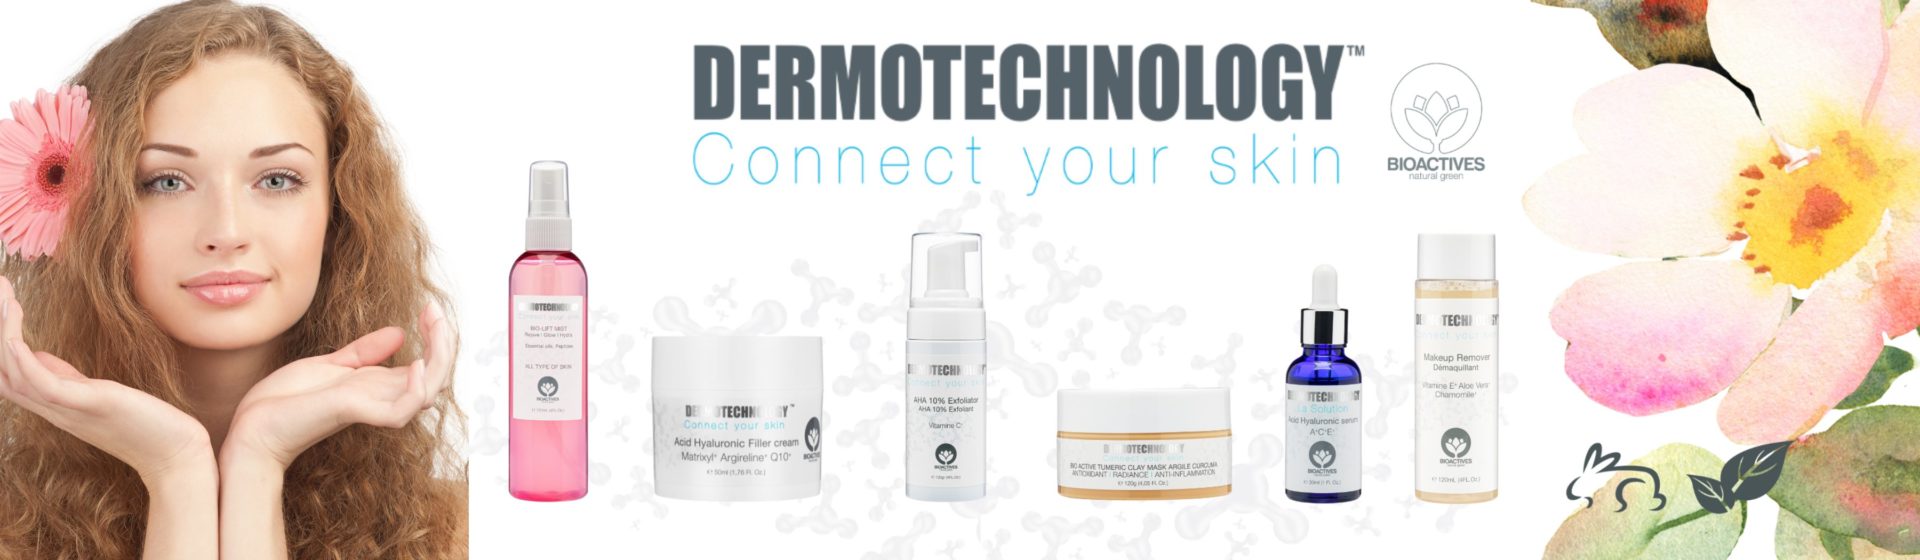 DERMOTECHNOLOGY Connect your skin